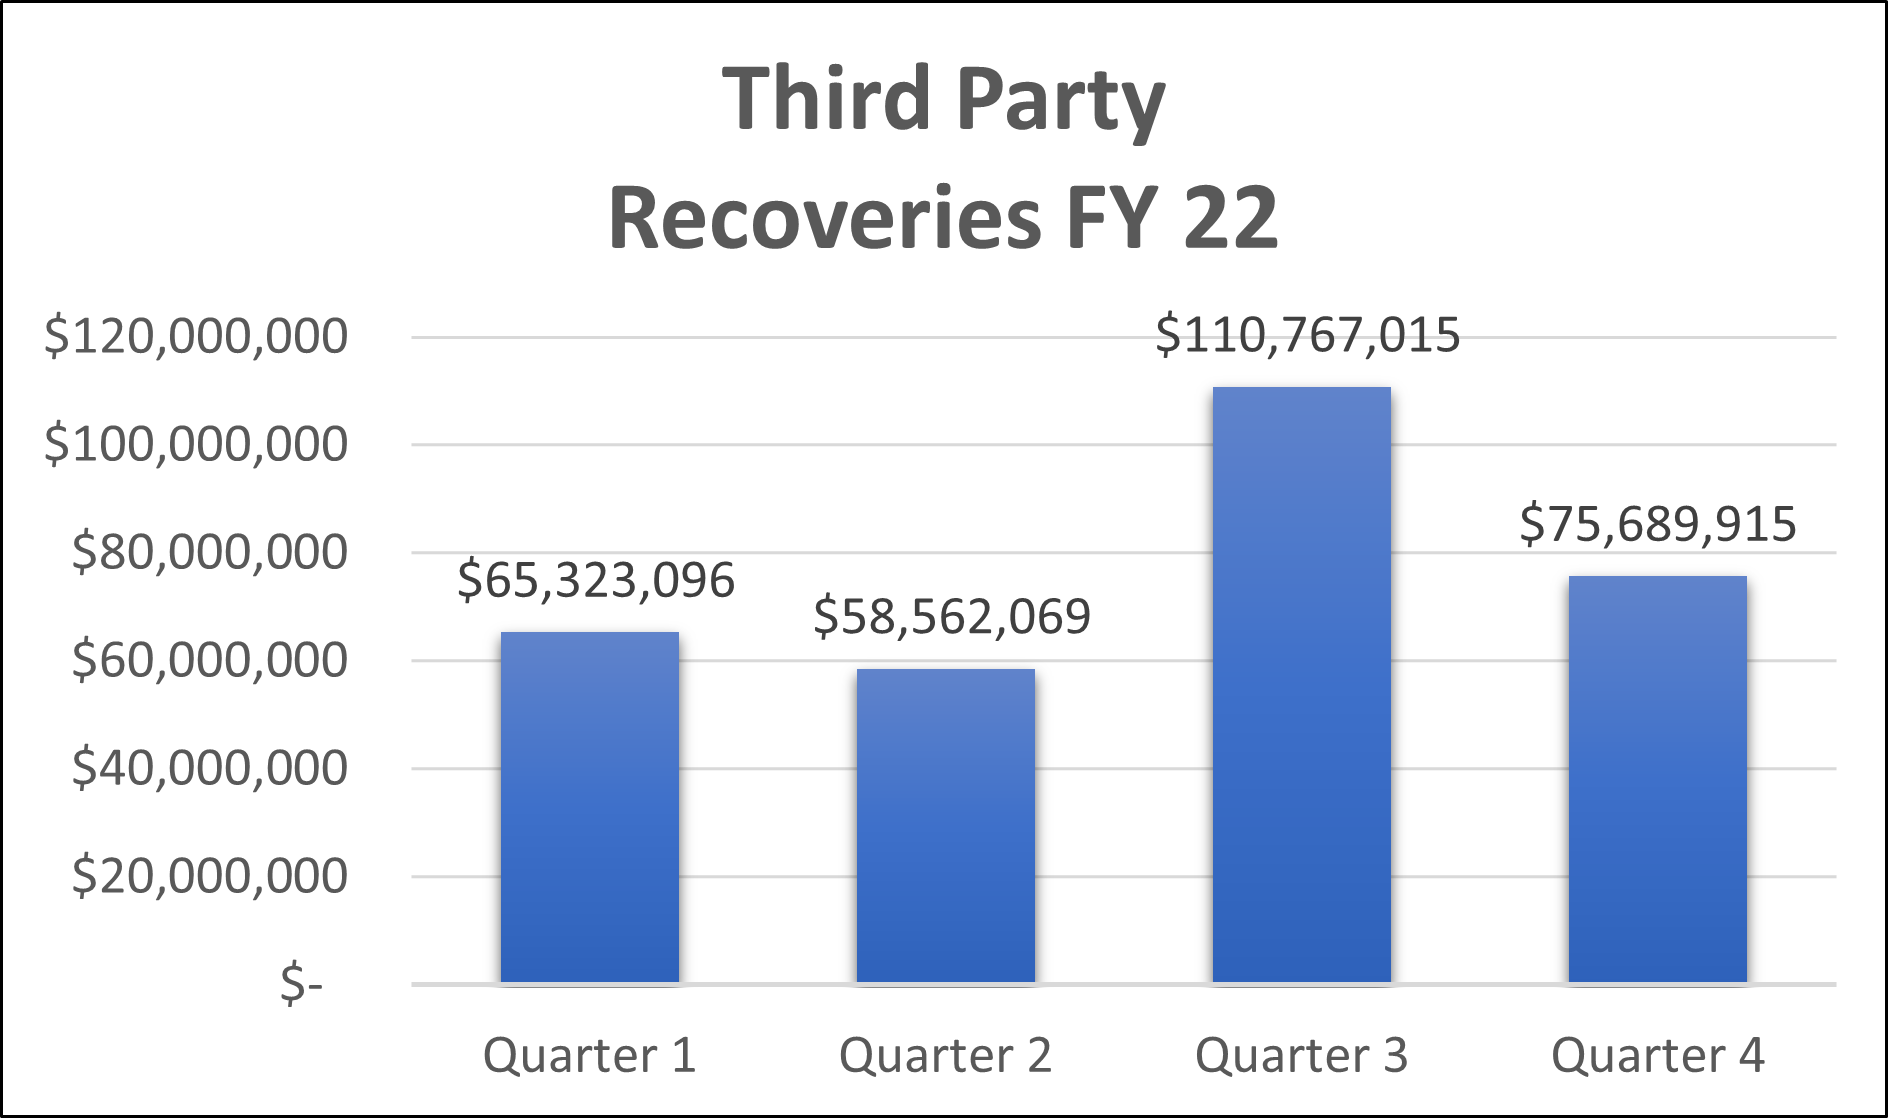 Third Party Recoveries